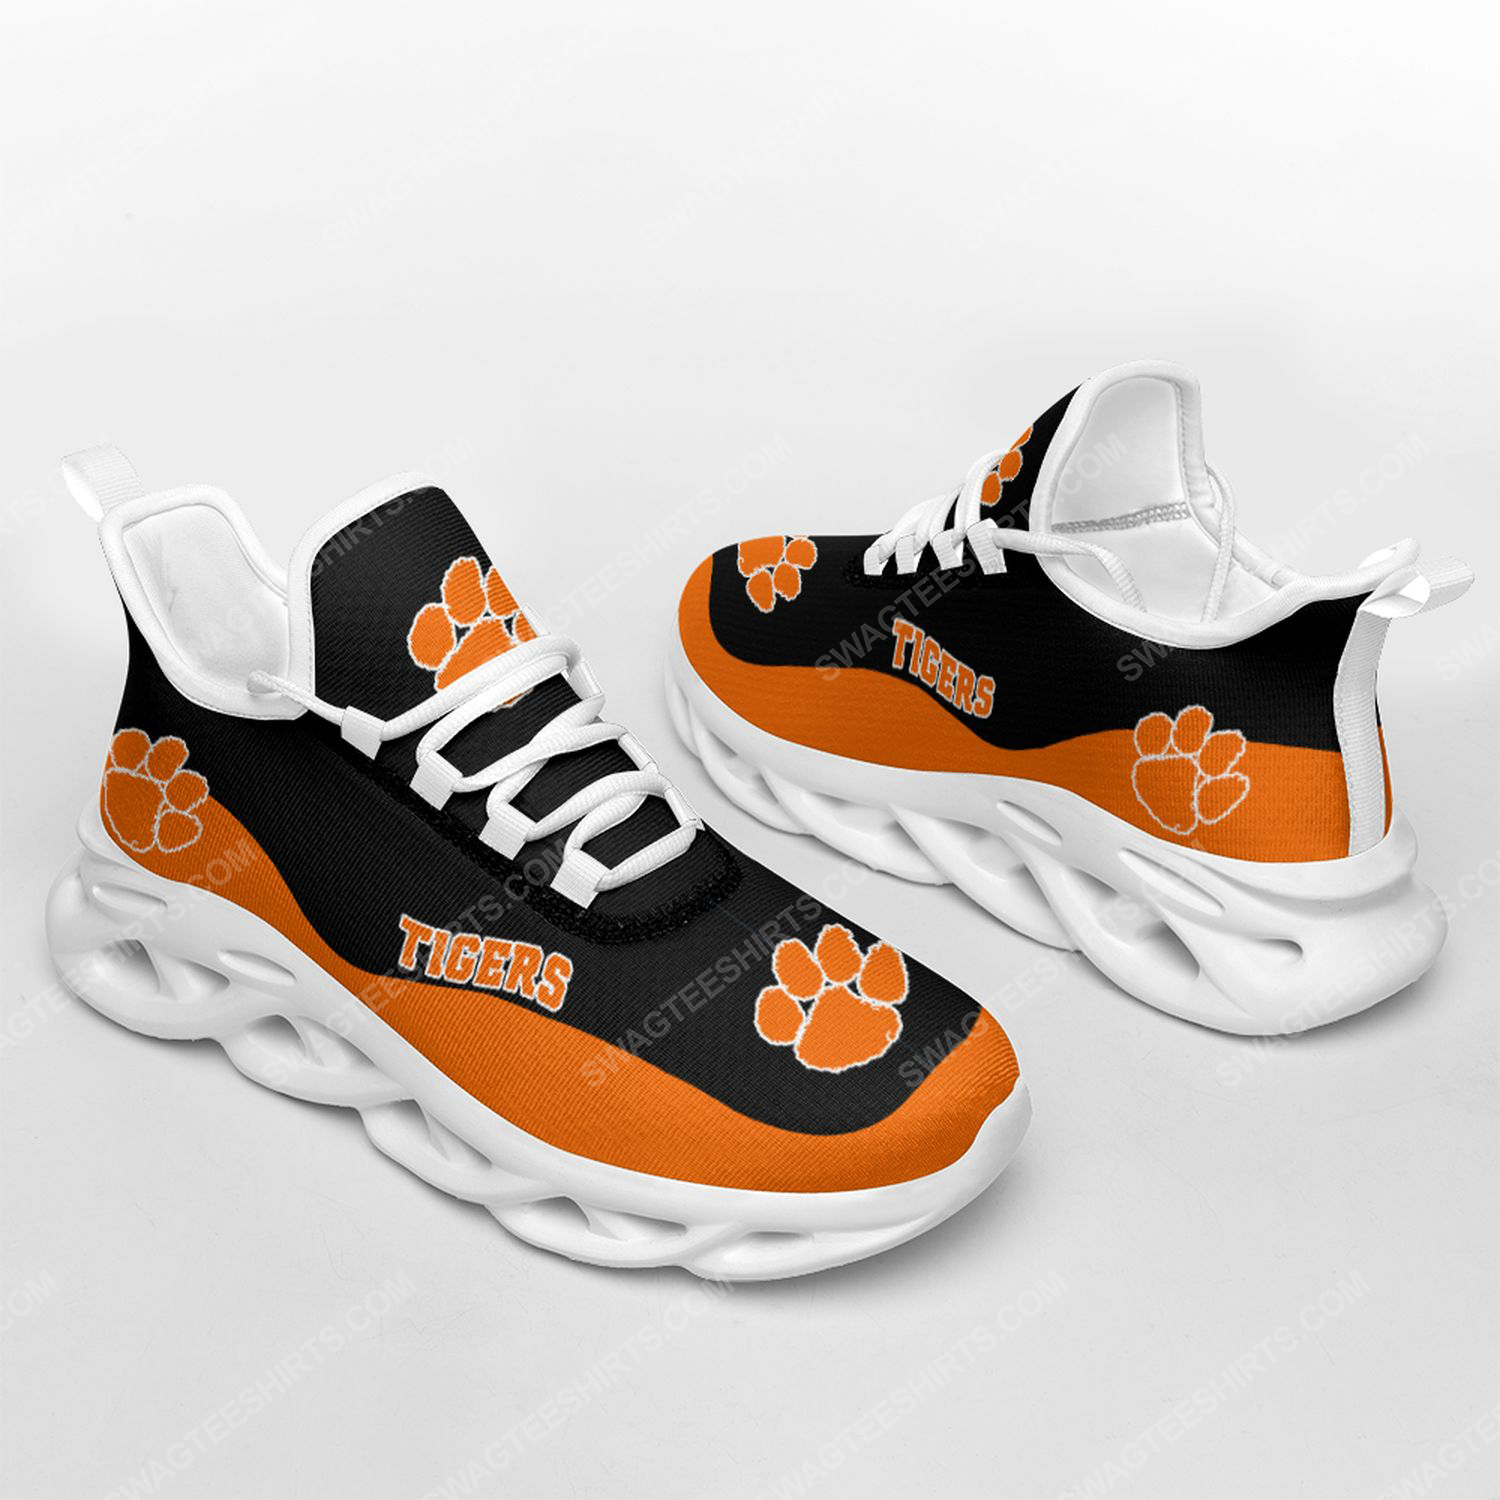 The clemson tigers football team max soul shoes 2